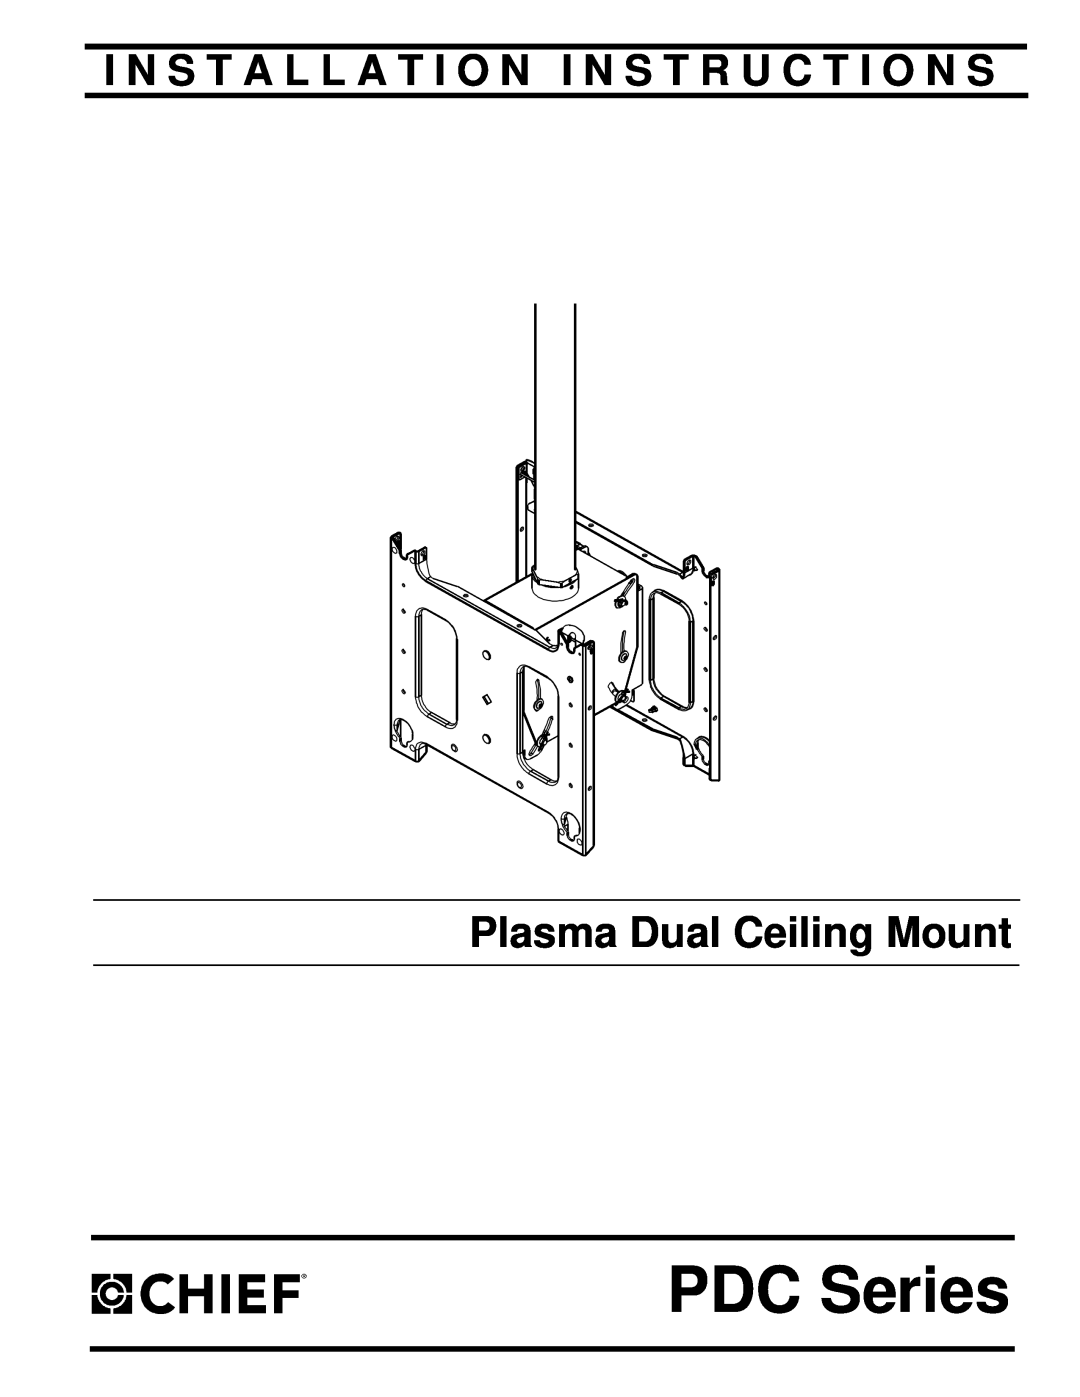 Chief Manufacturing PDC Series installation instructions I N S T A L L A T I O N I N S T R U C T I O N S 